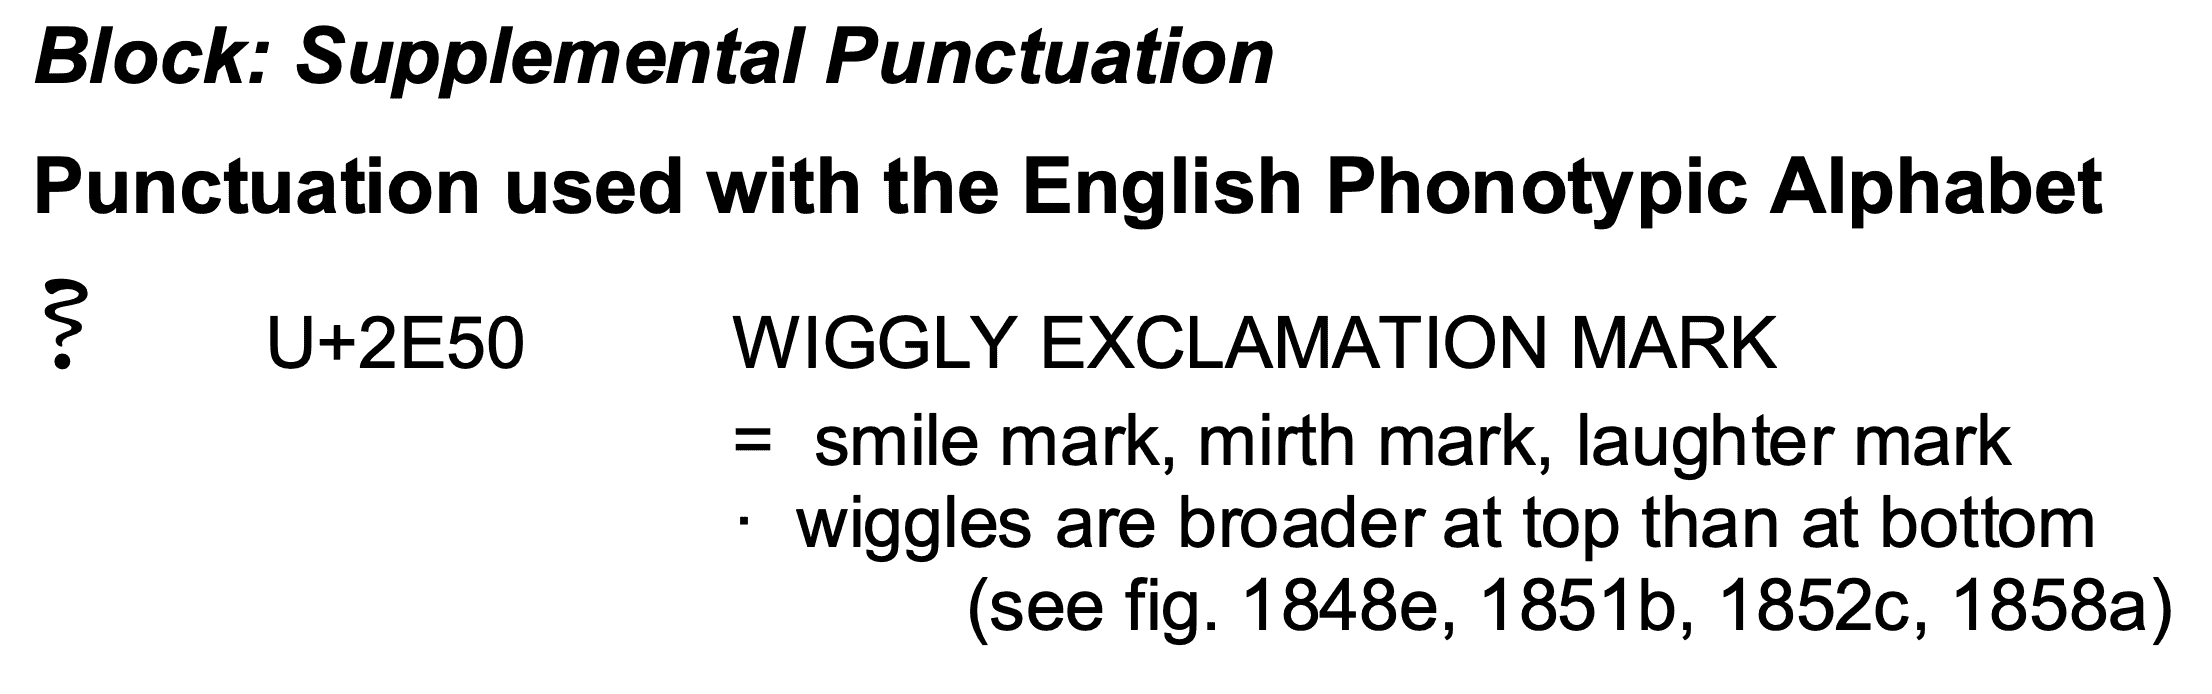 Text describing the proposed Unicode "wiggle exclamation mark"